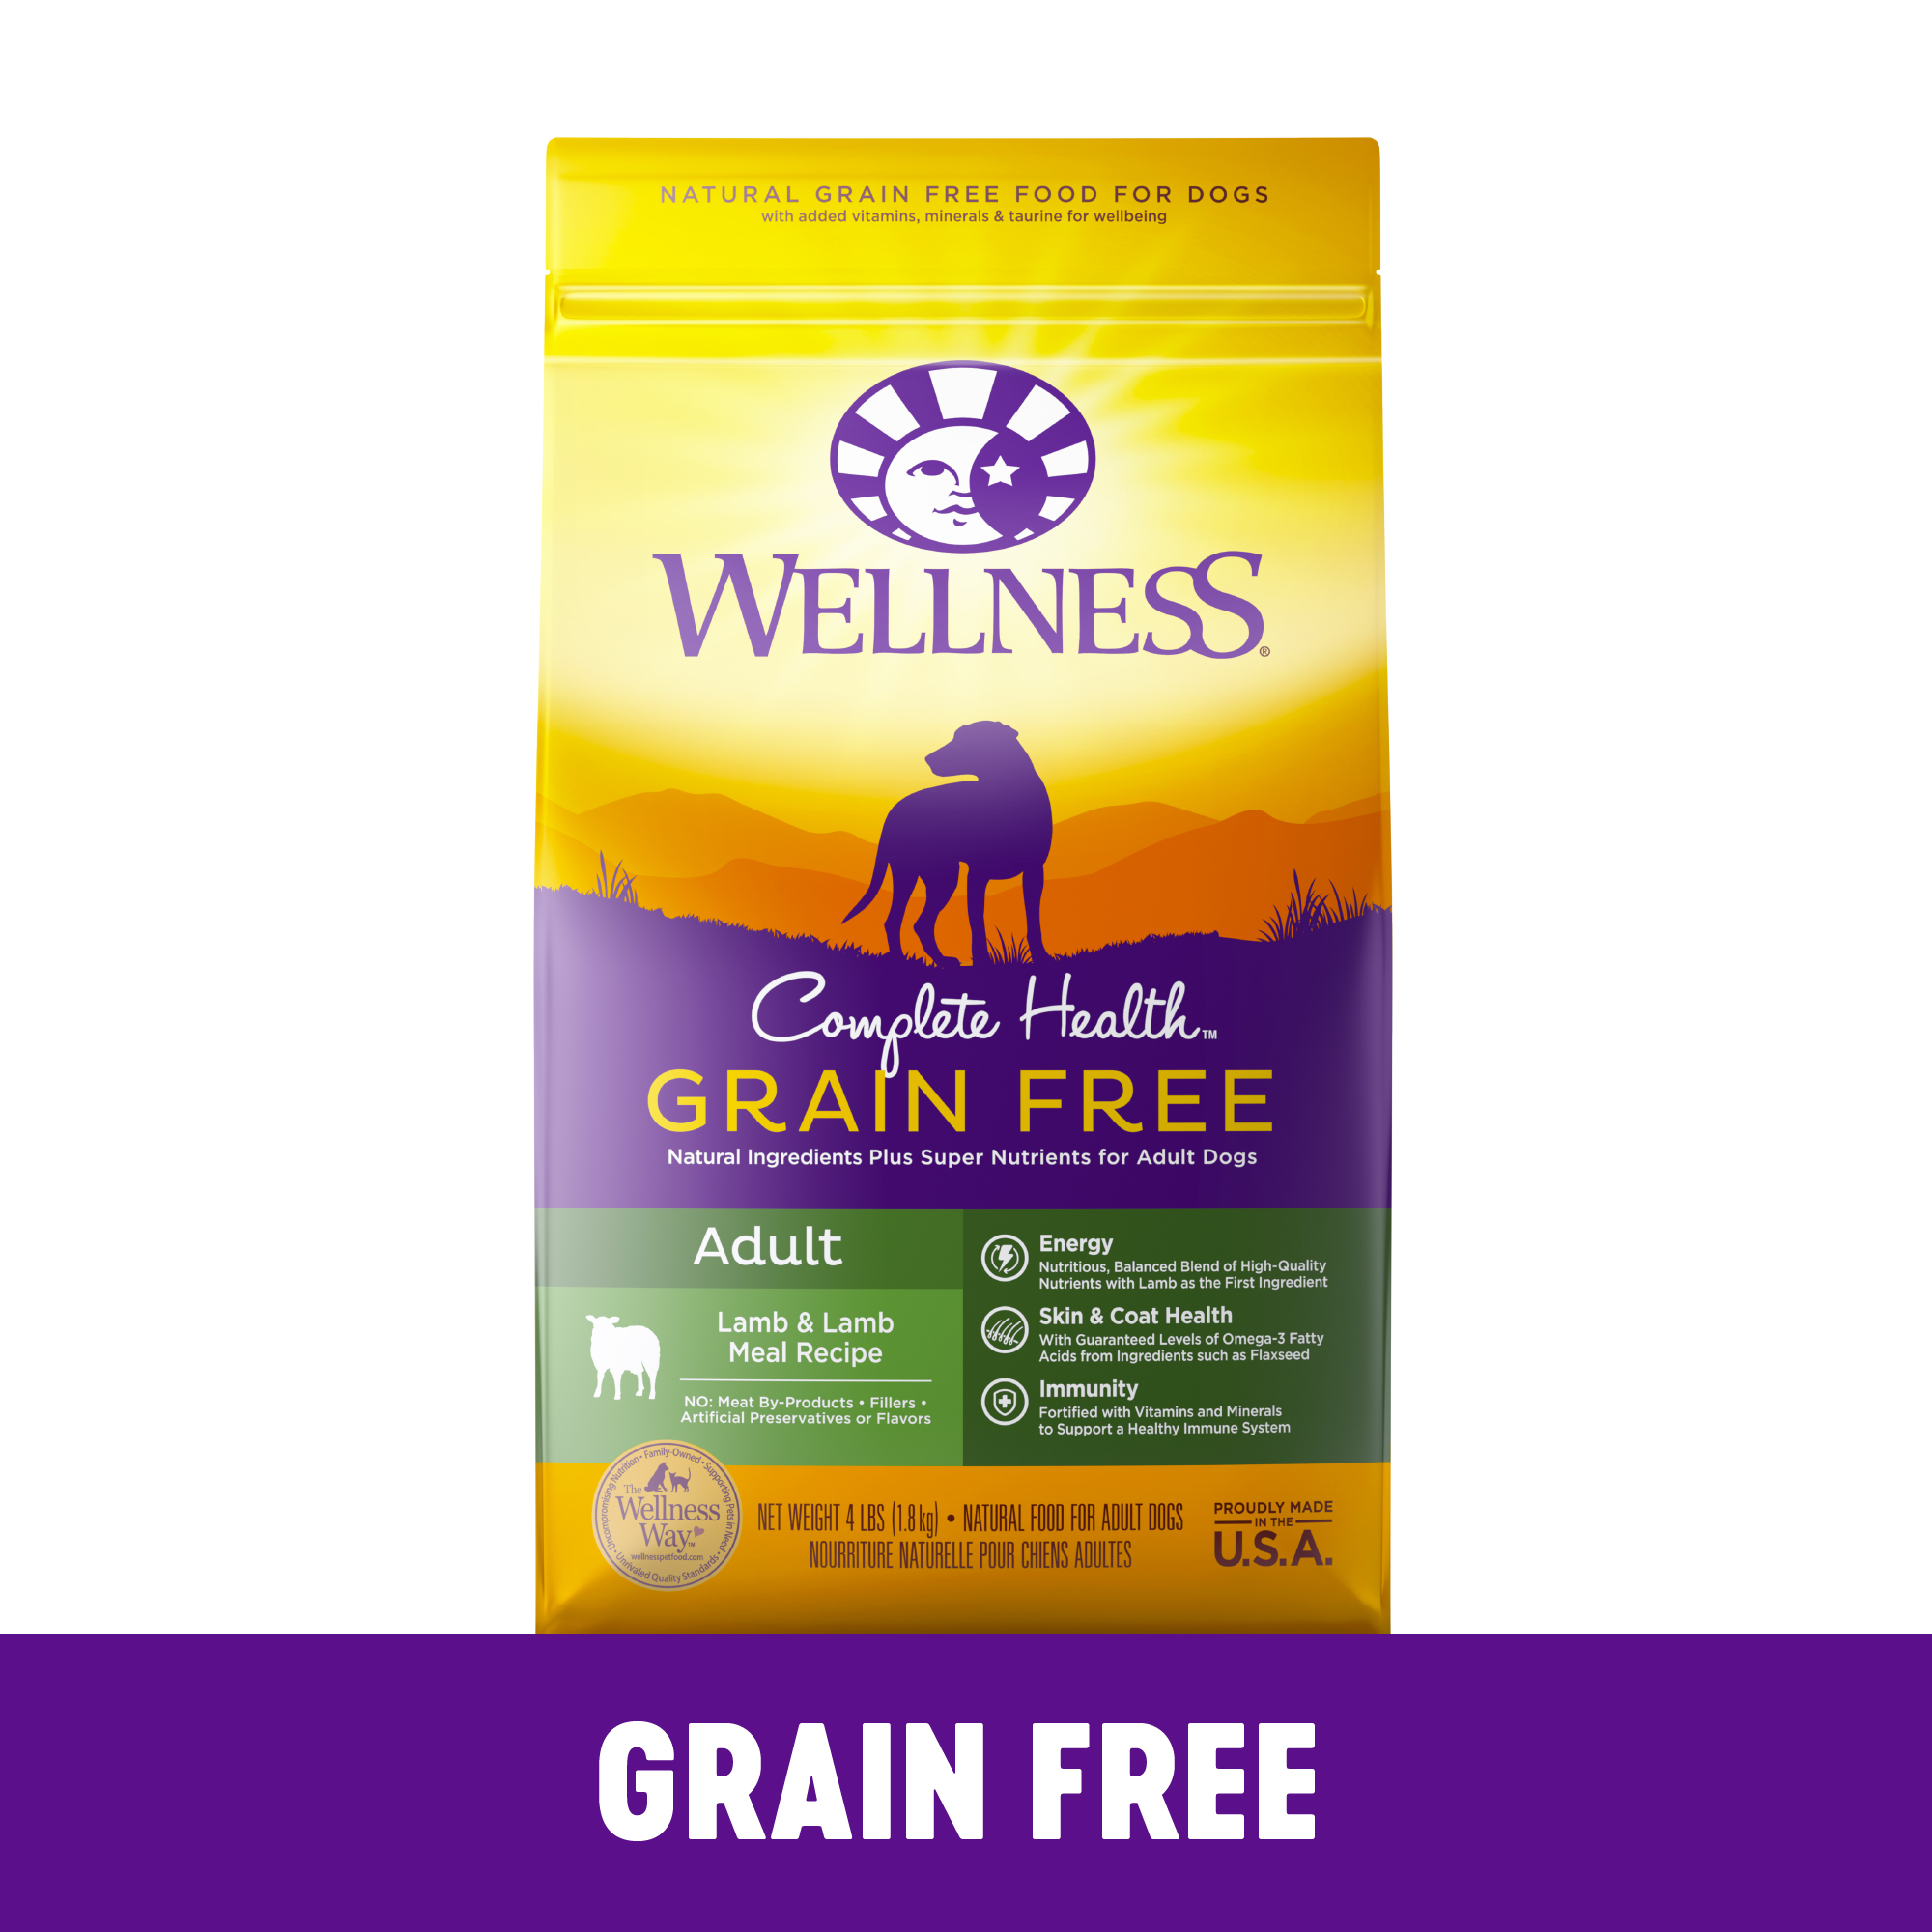 Wellness Complete Health Natural Grain Free Dry Dog Food, Lamb, 4-Pound Bag - image 1 of 7